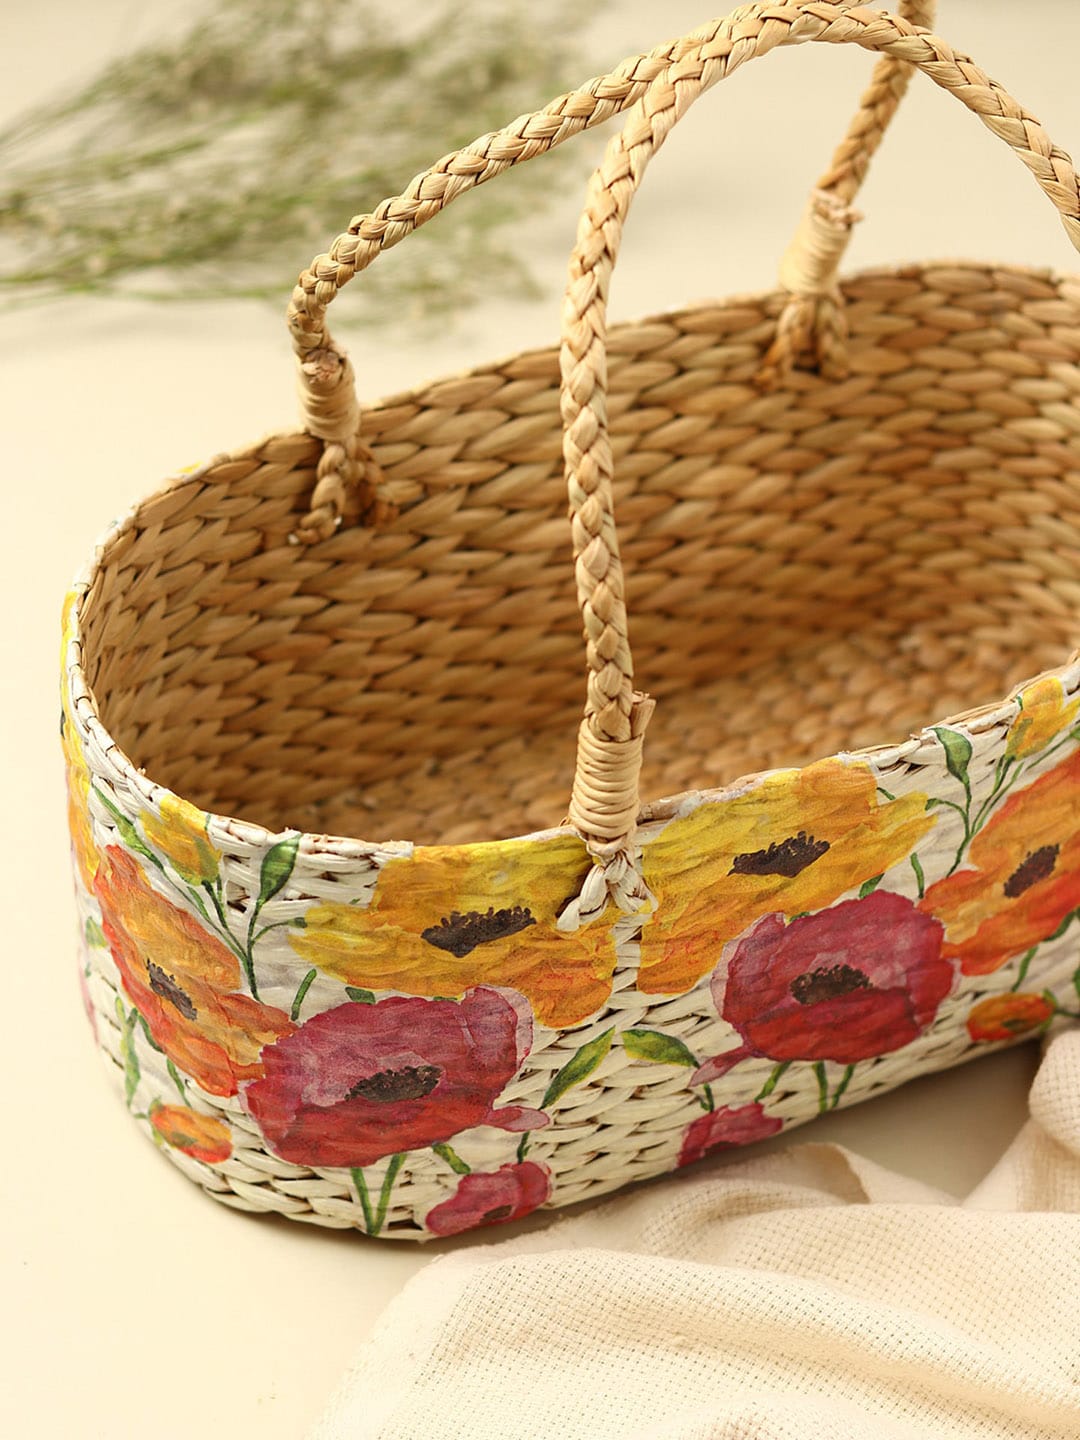 HABERE INDIA Beige & Off White Printed Fruit & Vegetable Basket Price in India